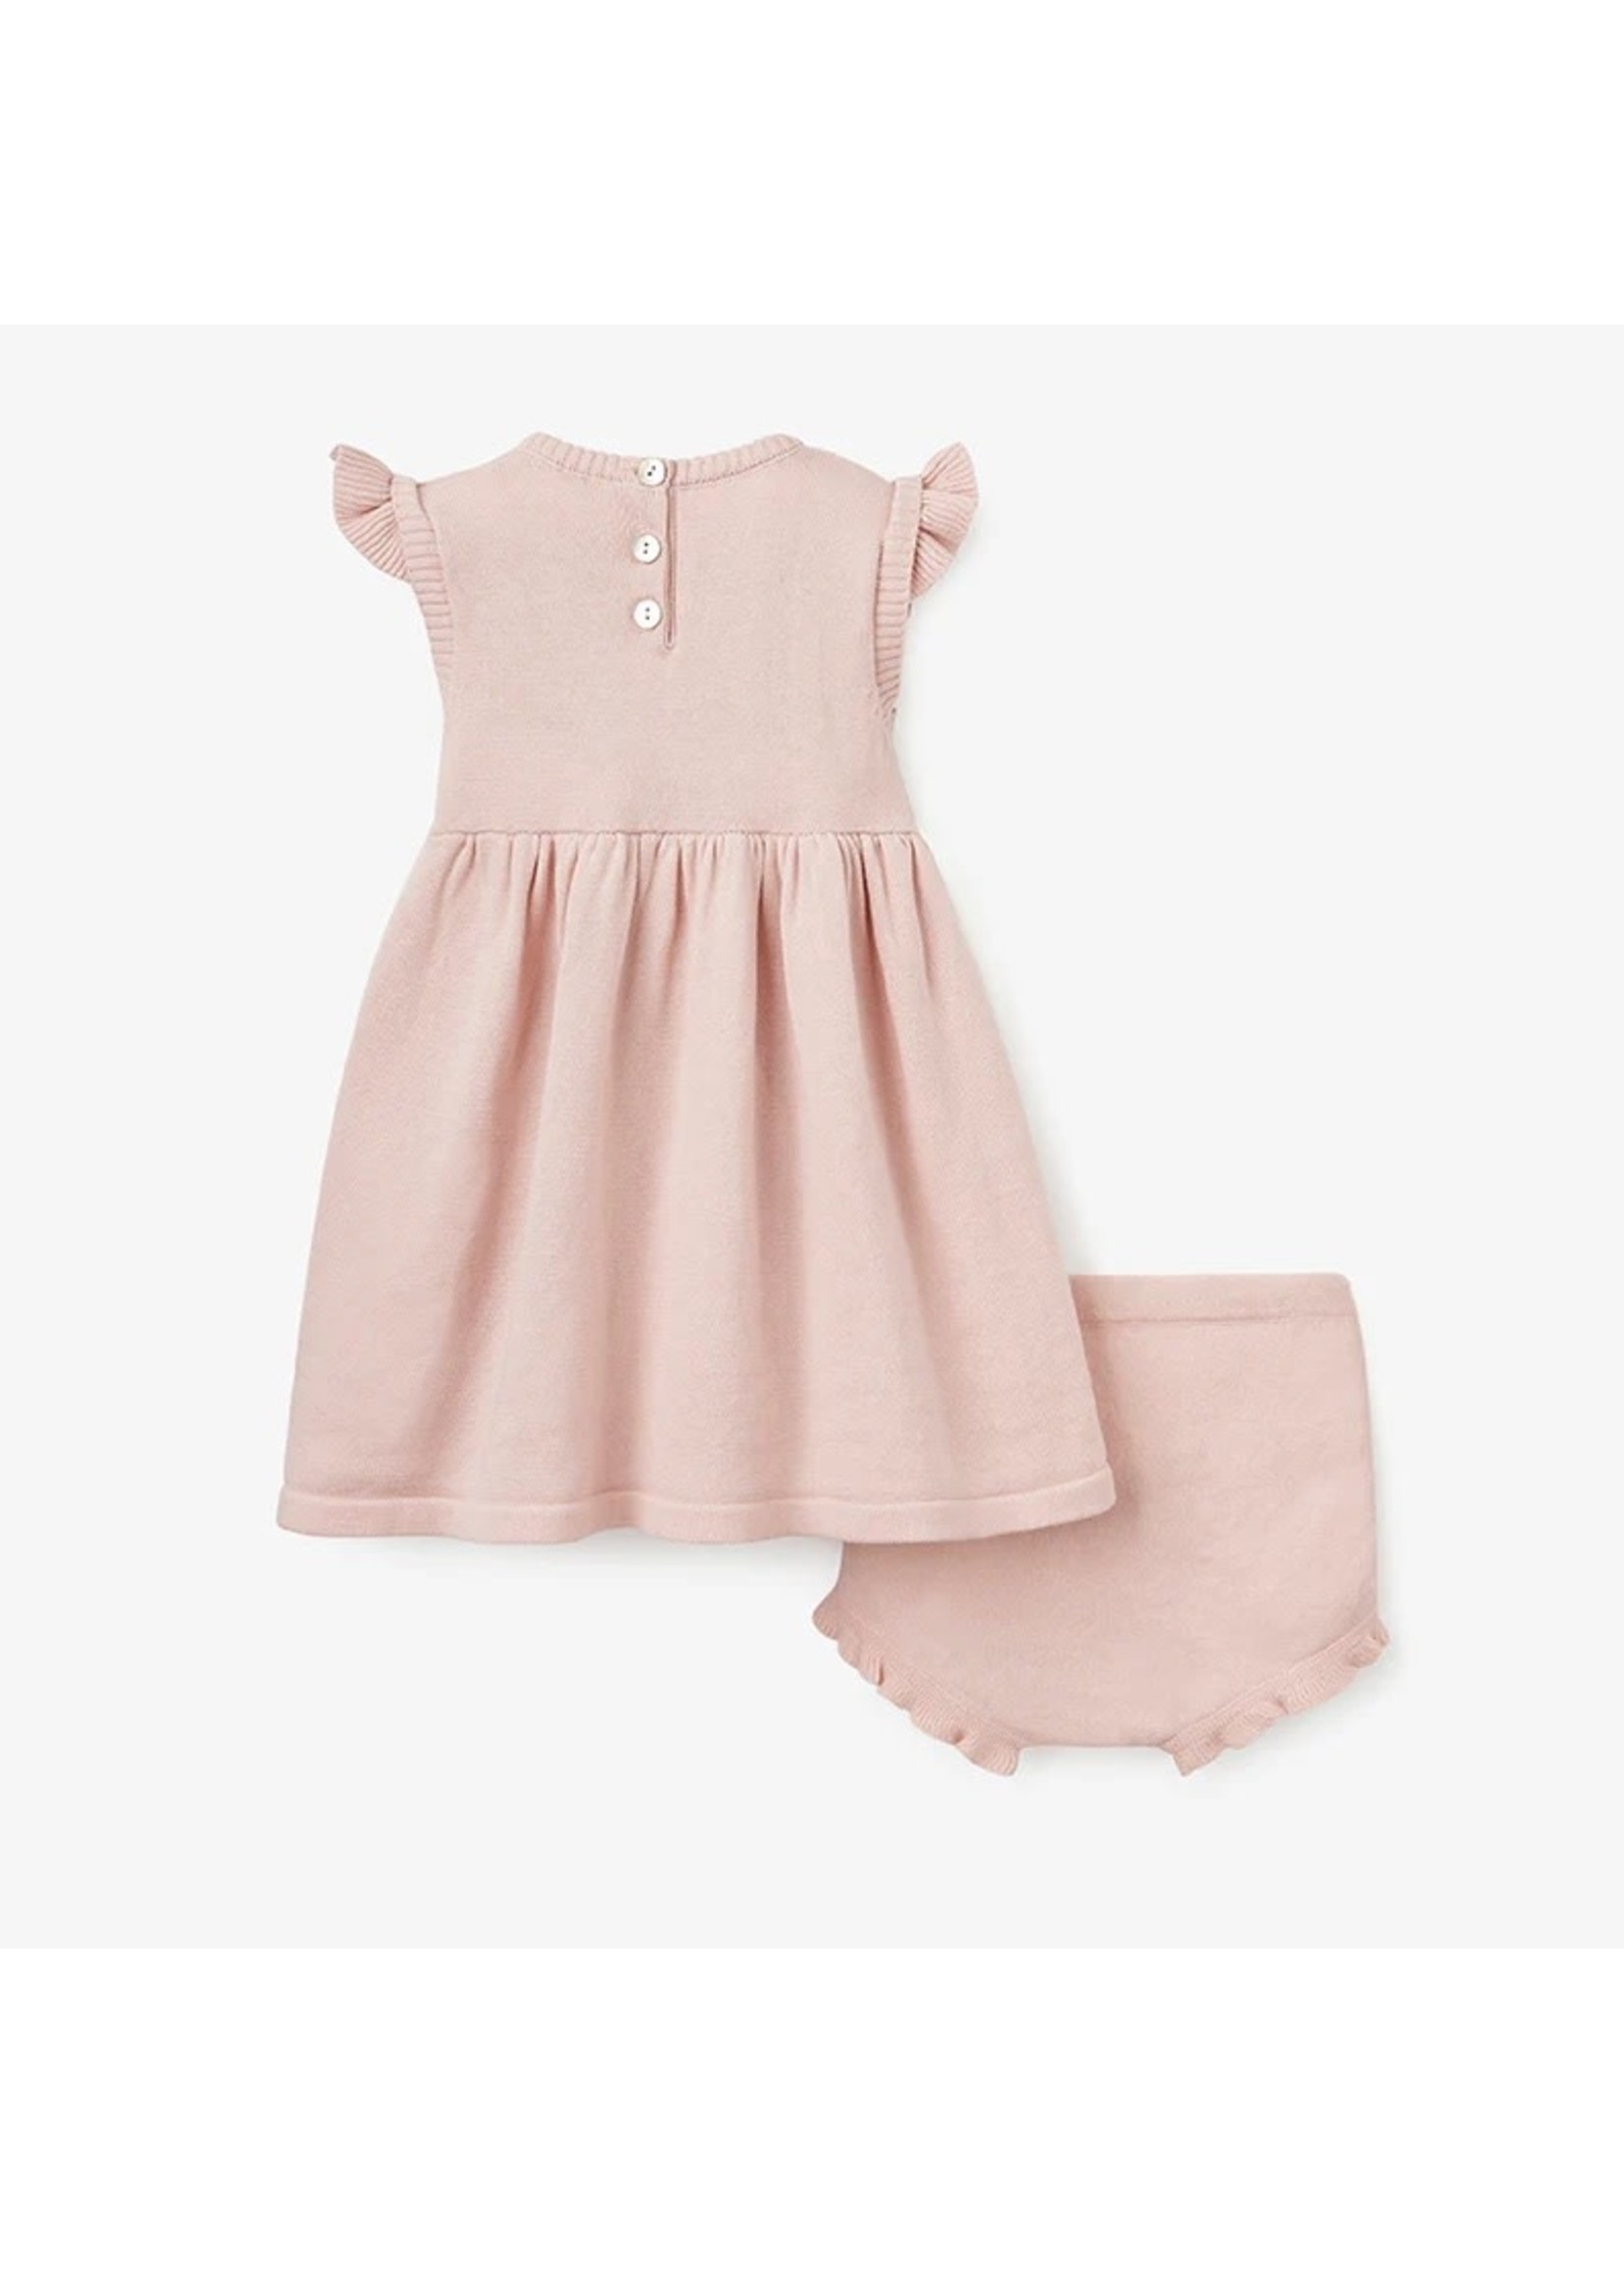 Bunny Dress with Bloomers - Blush 12M